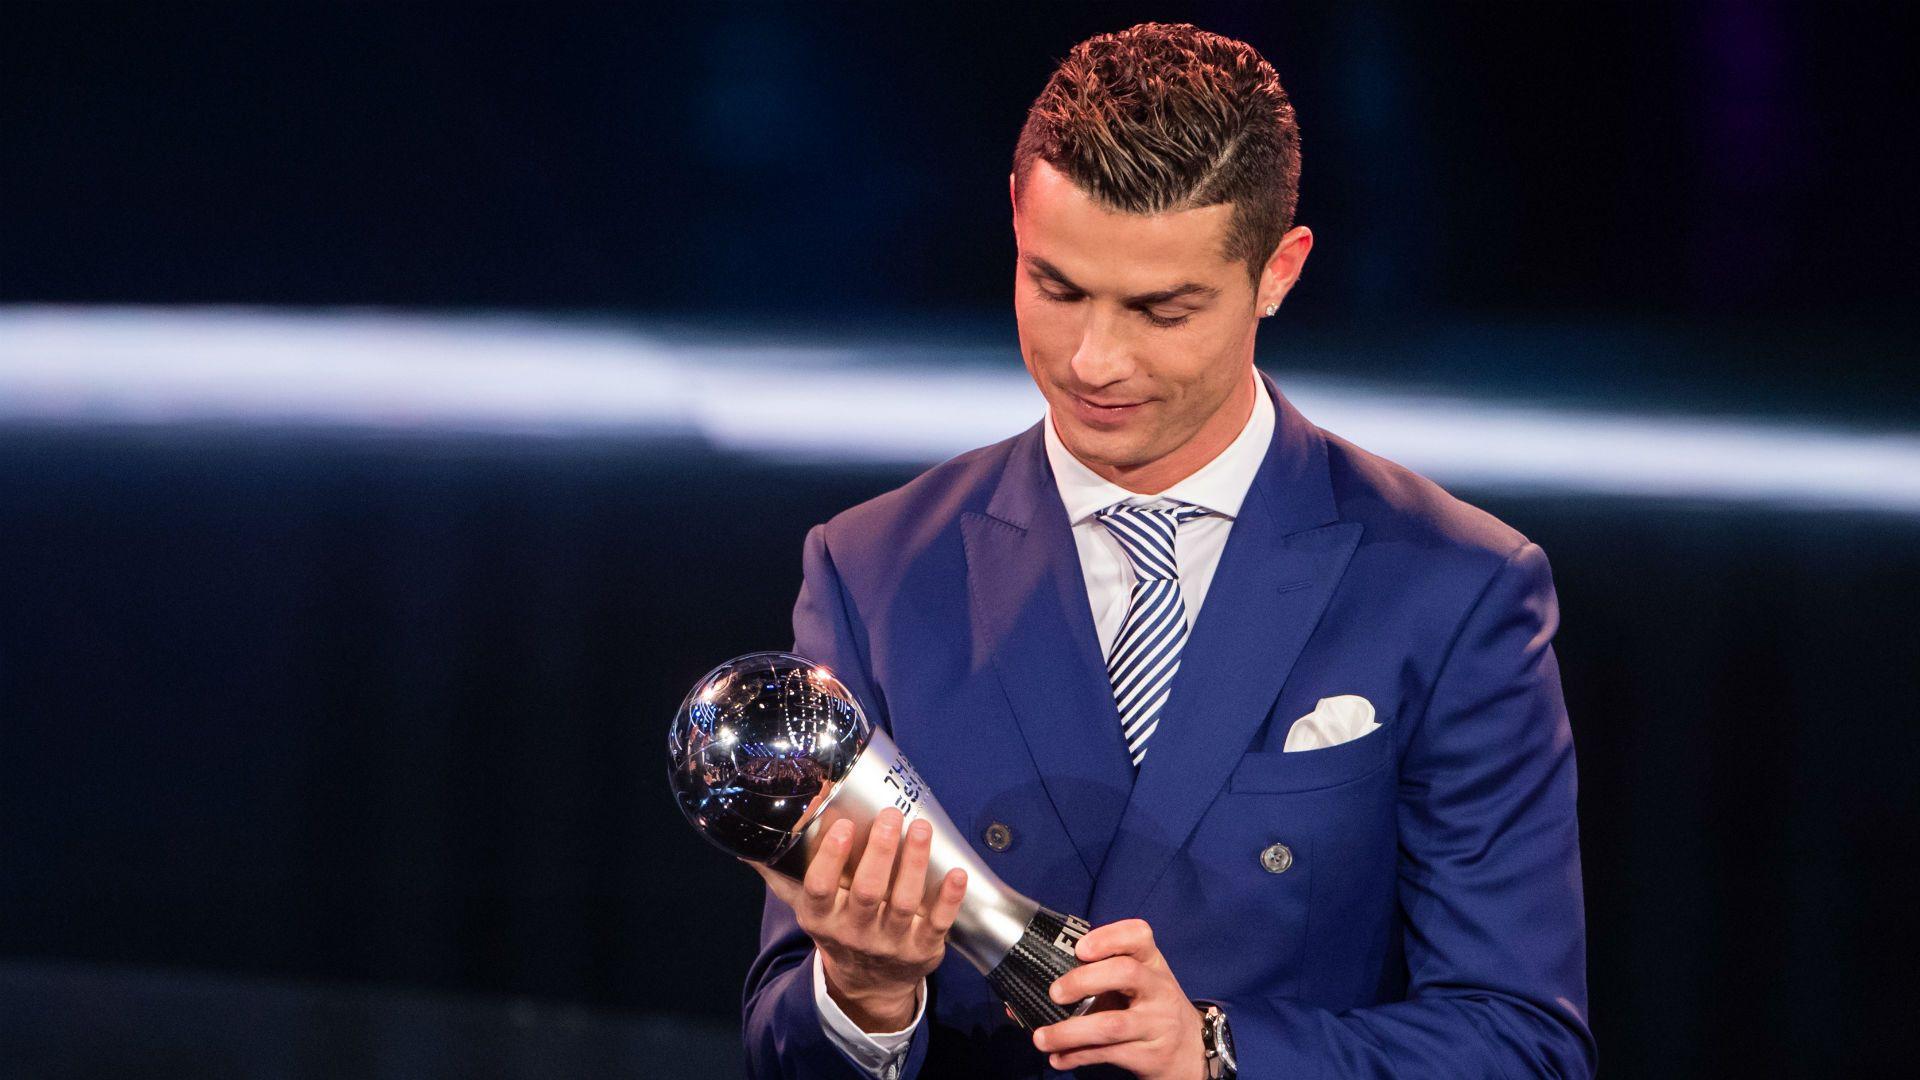 Ronaldo is Trump, Messi is Clinton received more votes